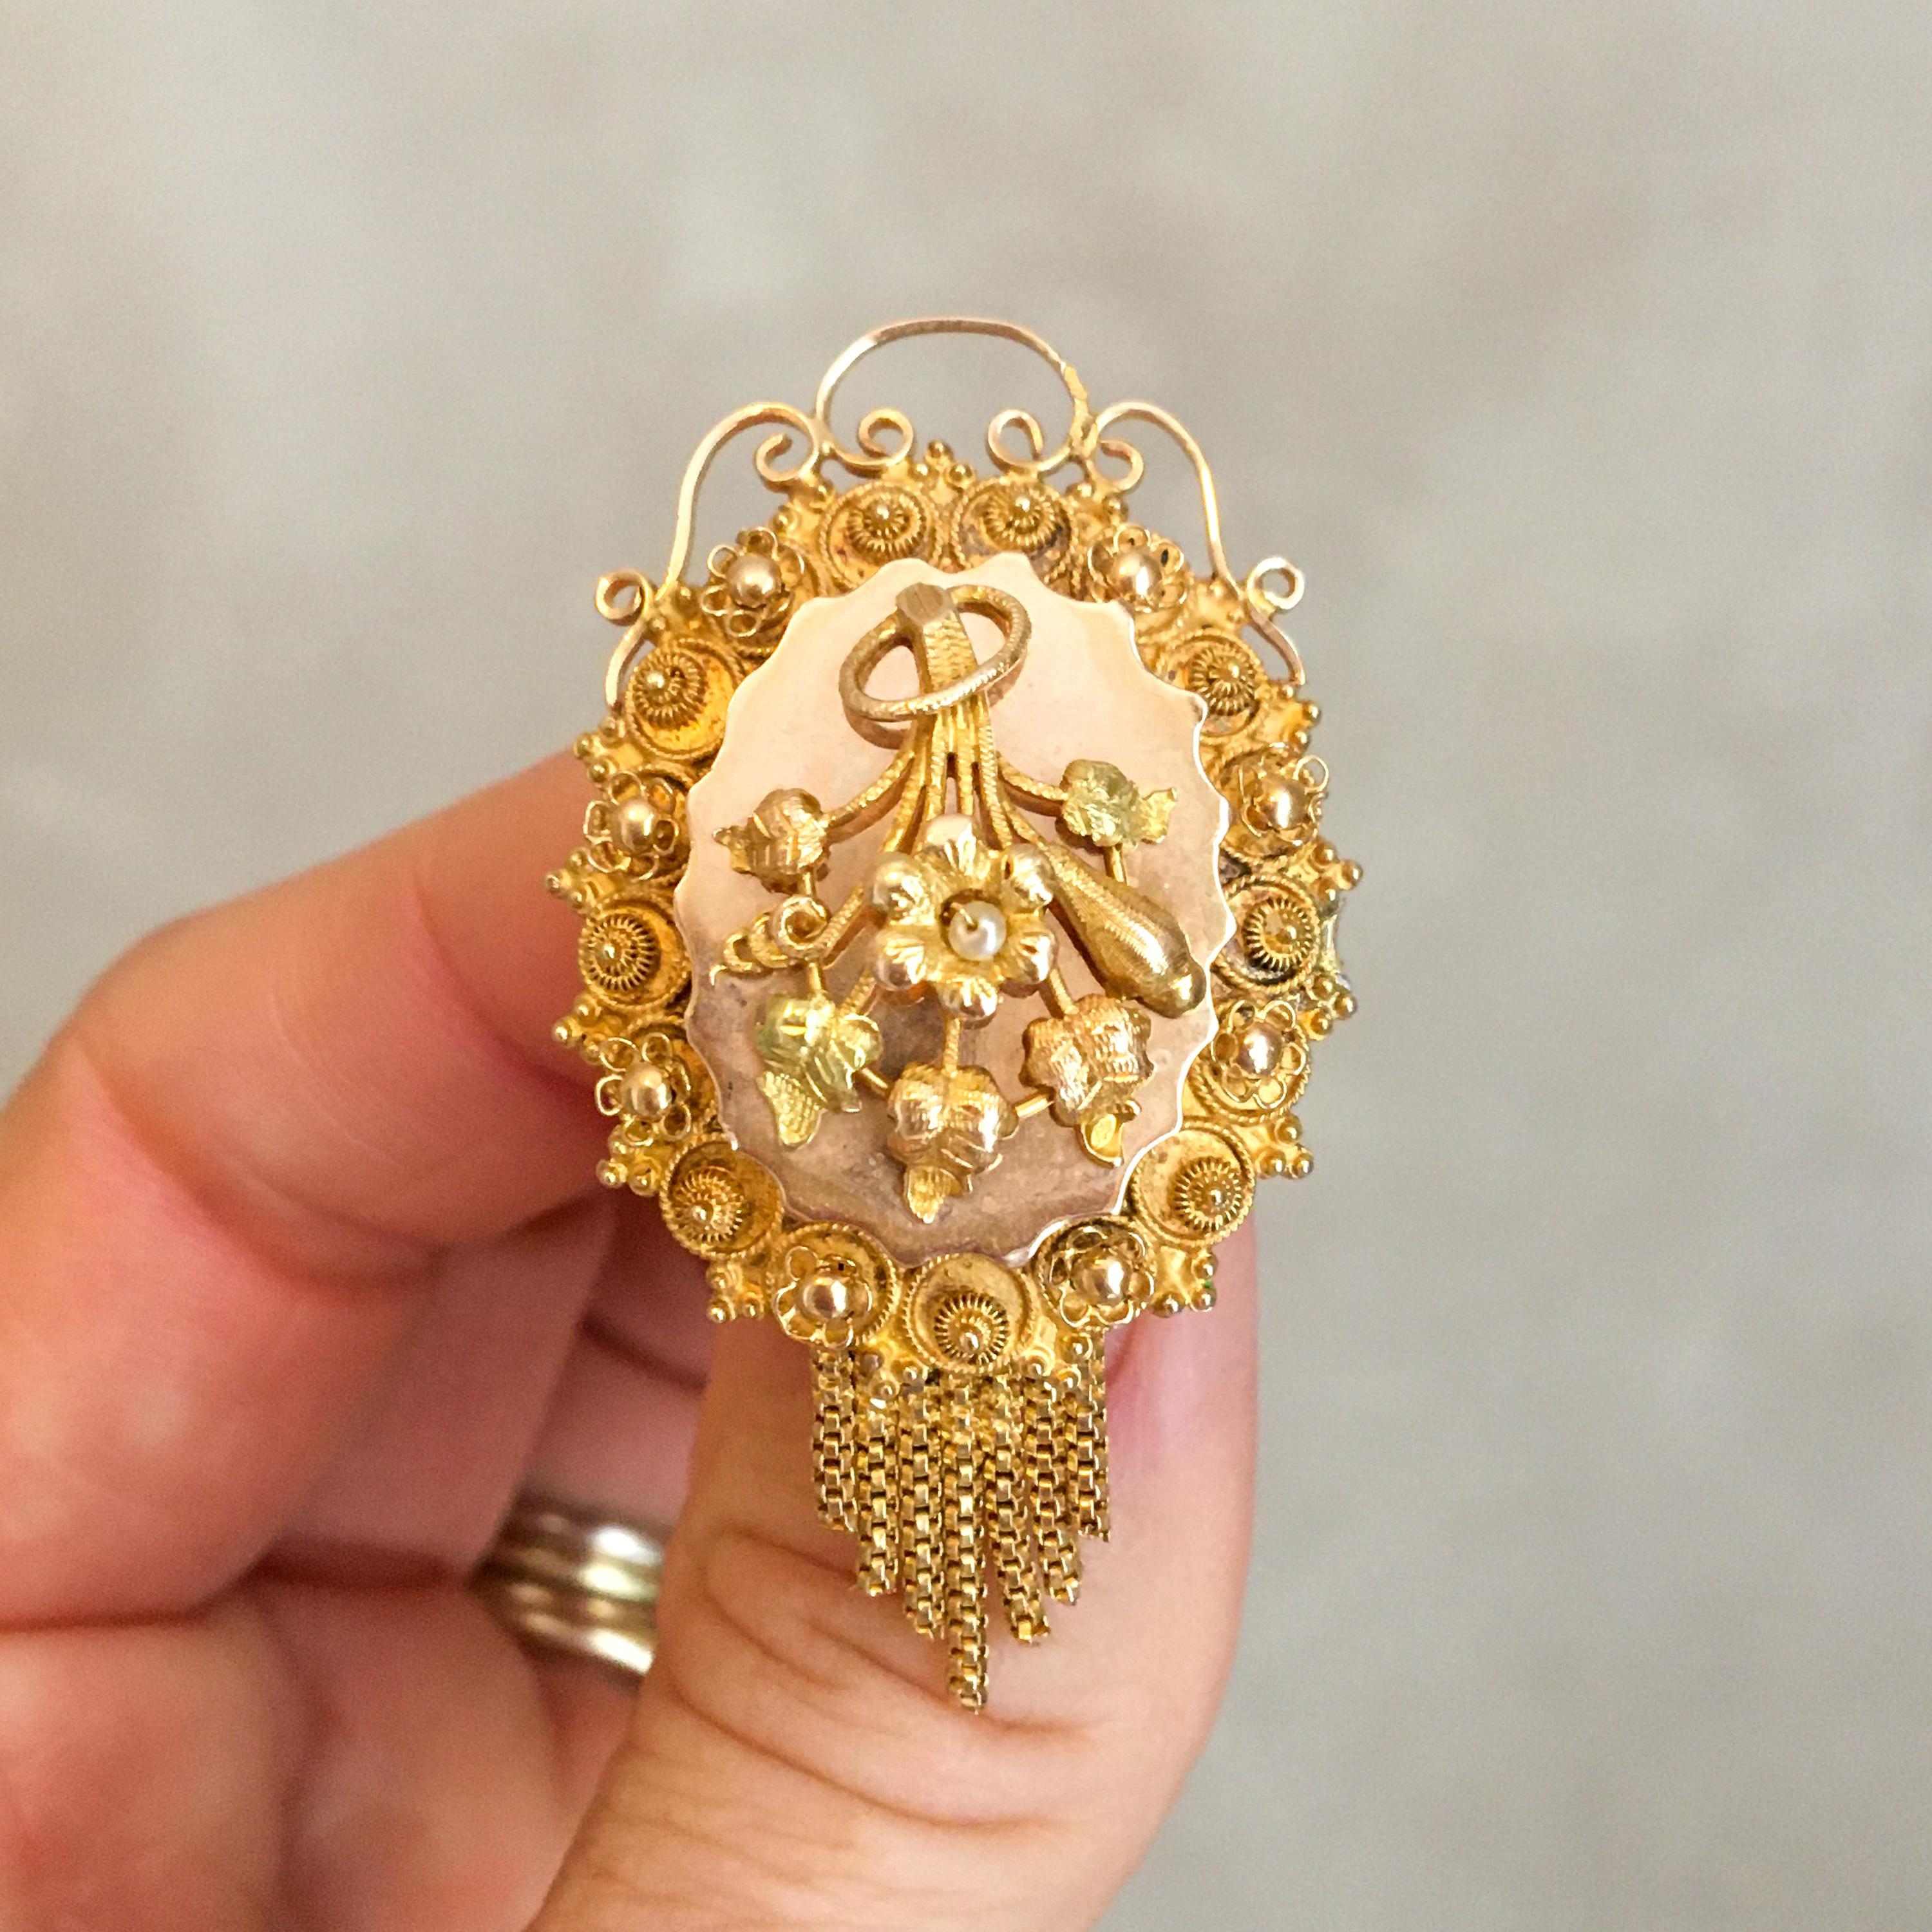 An antique 19th century 14 karat yellow gold brooch set with cannetille work and an Orient pearl. The center of the brooch is created with a floral design with leaves, a flower and an Orient pearl on top. The border of the frame is made of fine